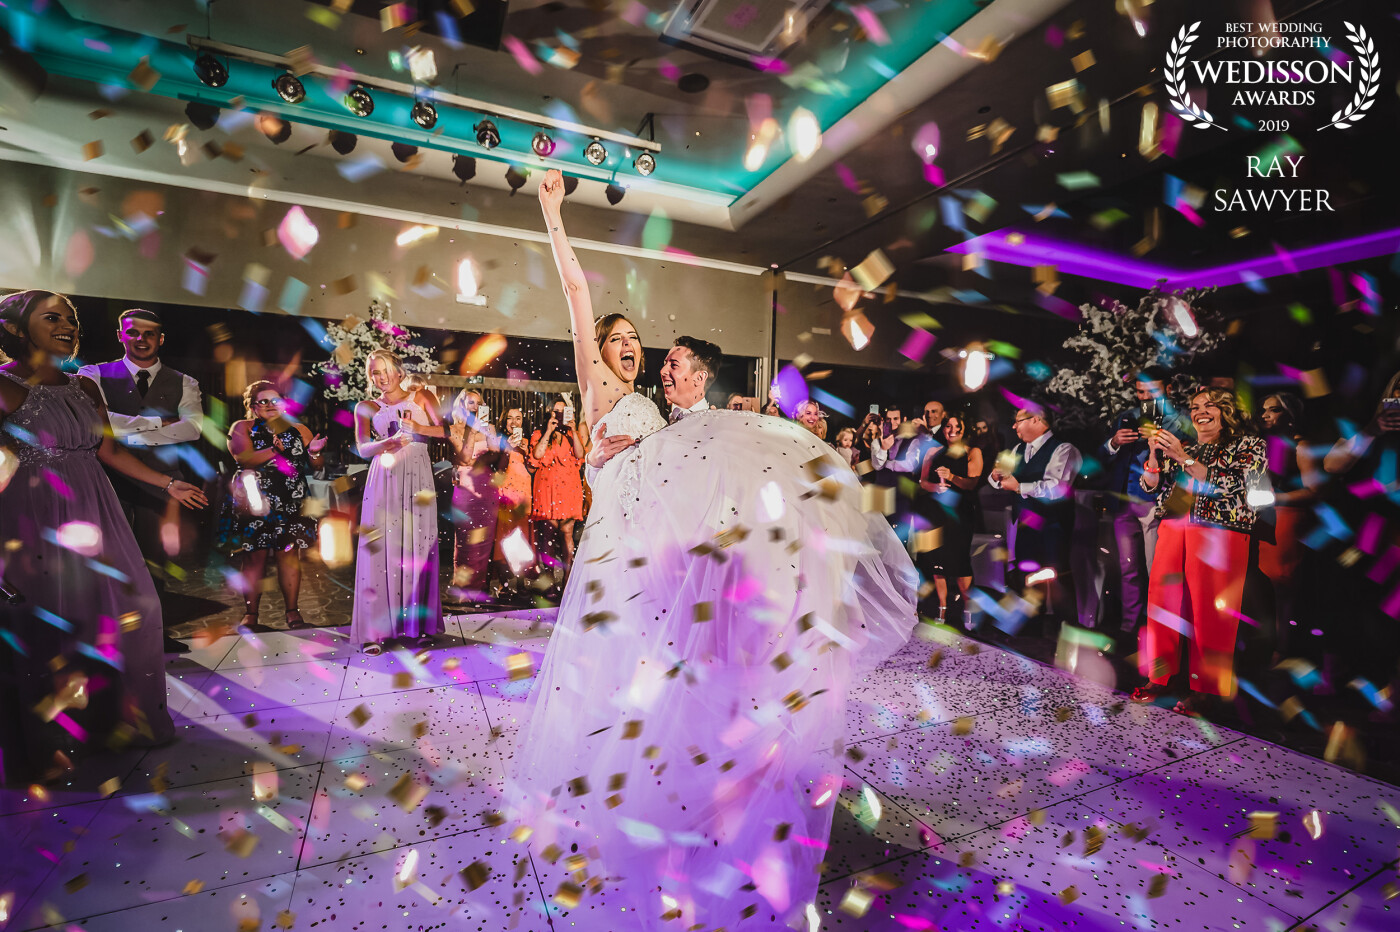 After talking with Ross and Charlotte before the wedding I suggested Confetti Canons for the 1st dance and they worked out he would lift her up as the signal to fire. Worked like a charm.